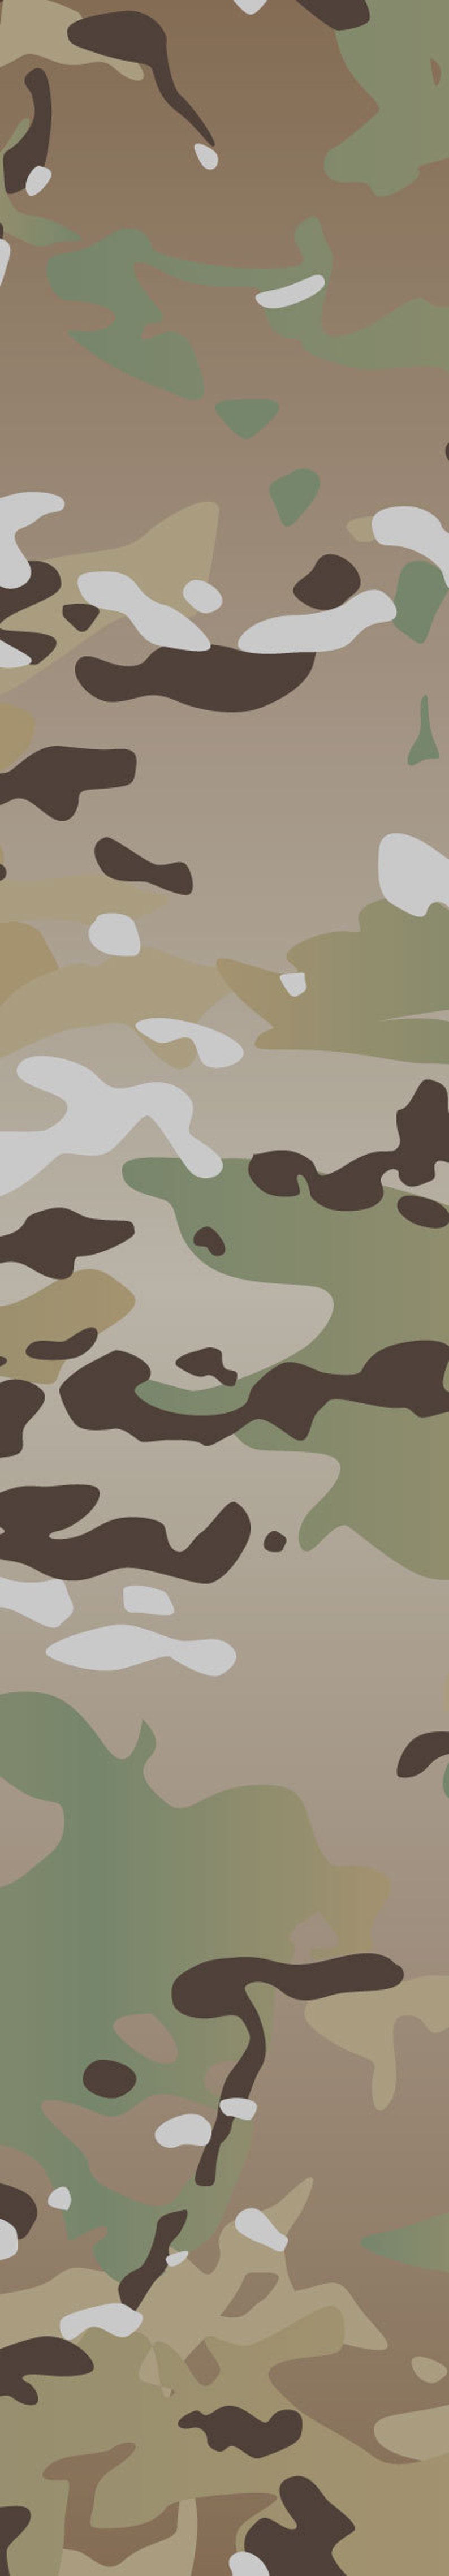 OCP Original vector camouflage pattern for printing, scorpion, army, uniform, print, texture, military camo, MTP, woodland, forest image 3